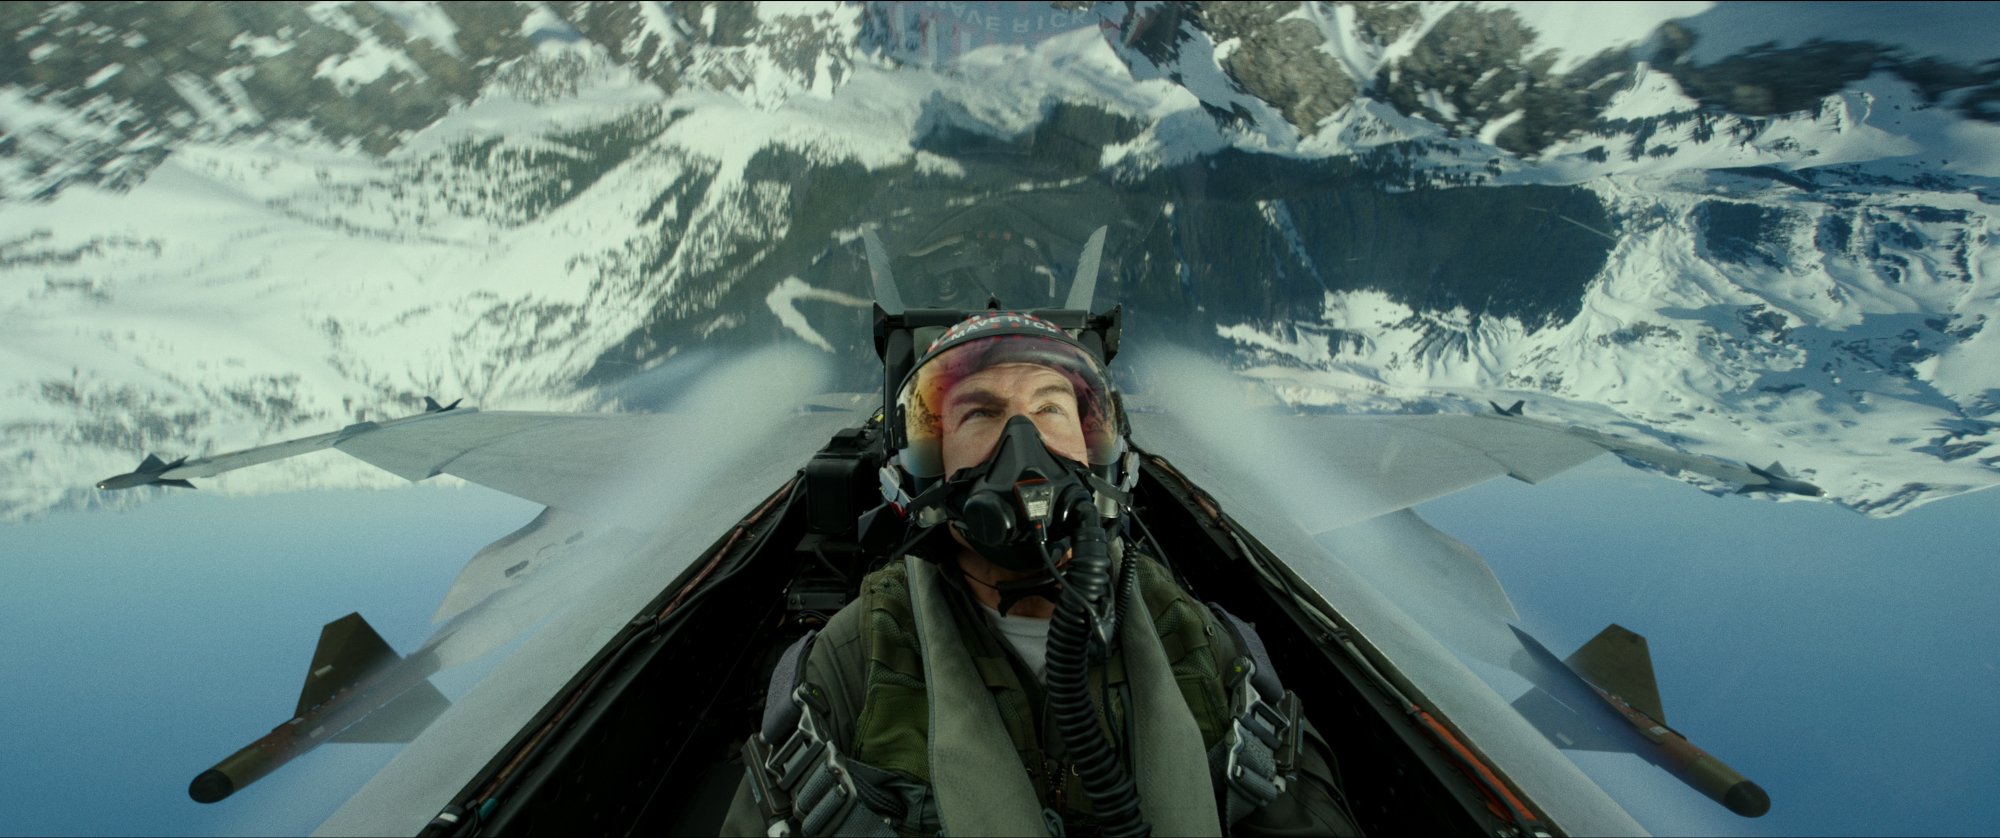 'Top Gun: Maverick' Tom Cruise as Maverick in jet with a helmet on, looking up toward the ground while inverted